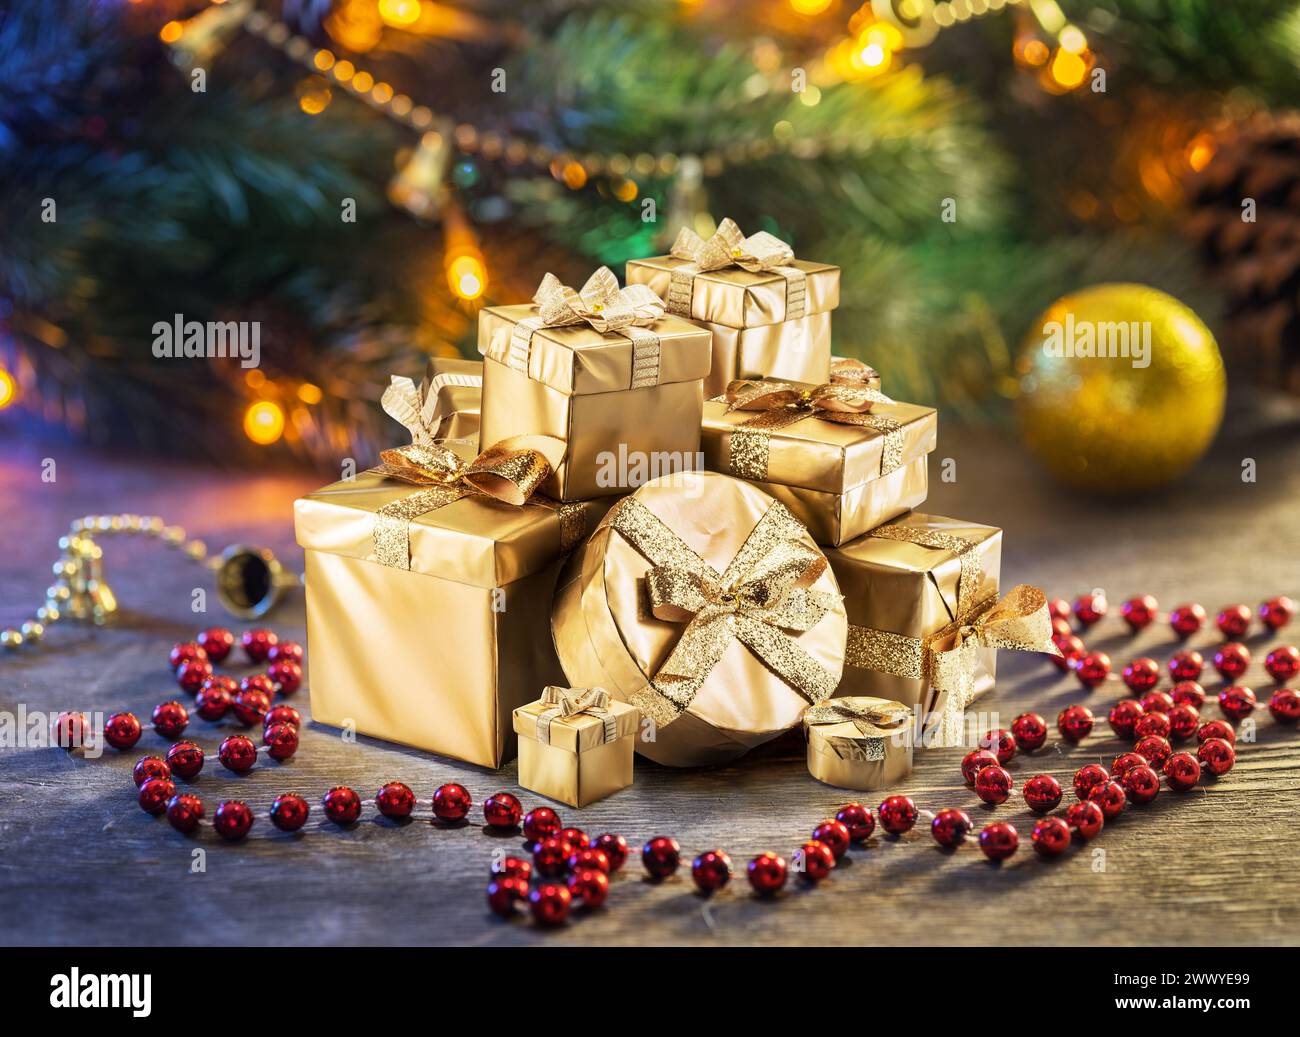 Christmas gifts as the symbol of Christmas happiness and miracle. Sparkling fairy lights on the Christmas tree at the background. Stock Photo